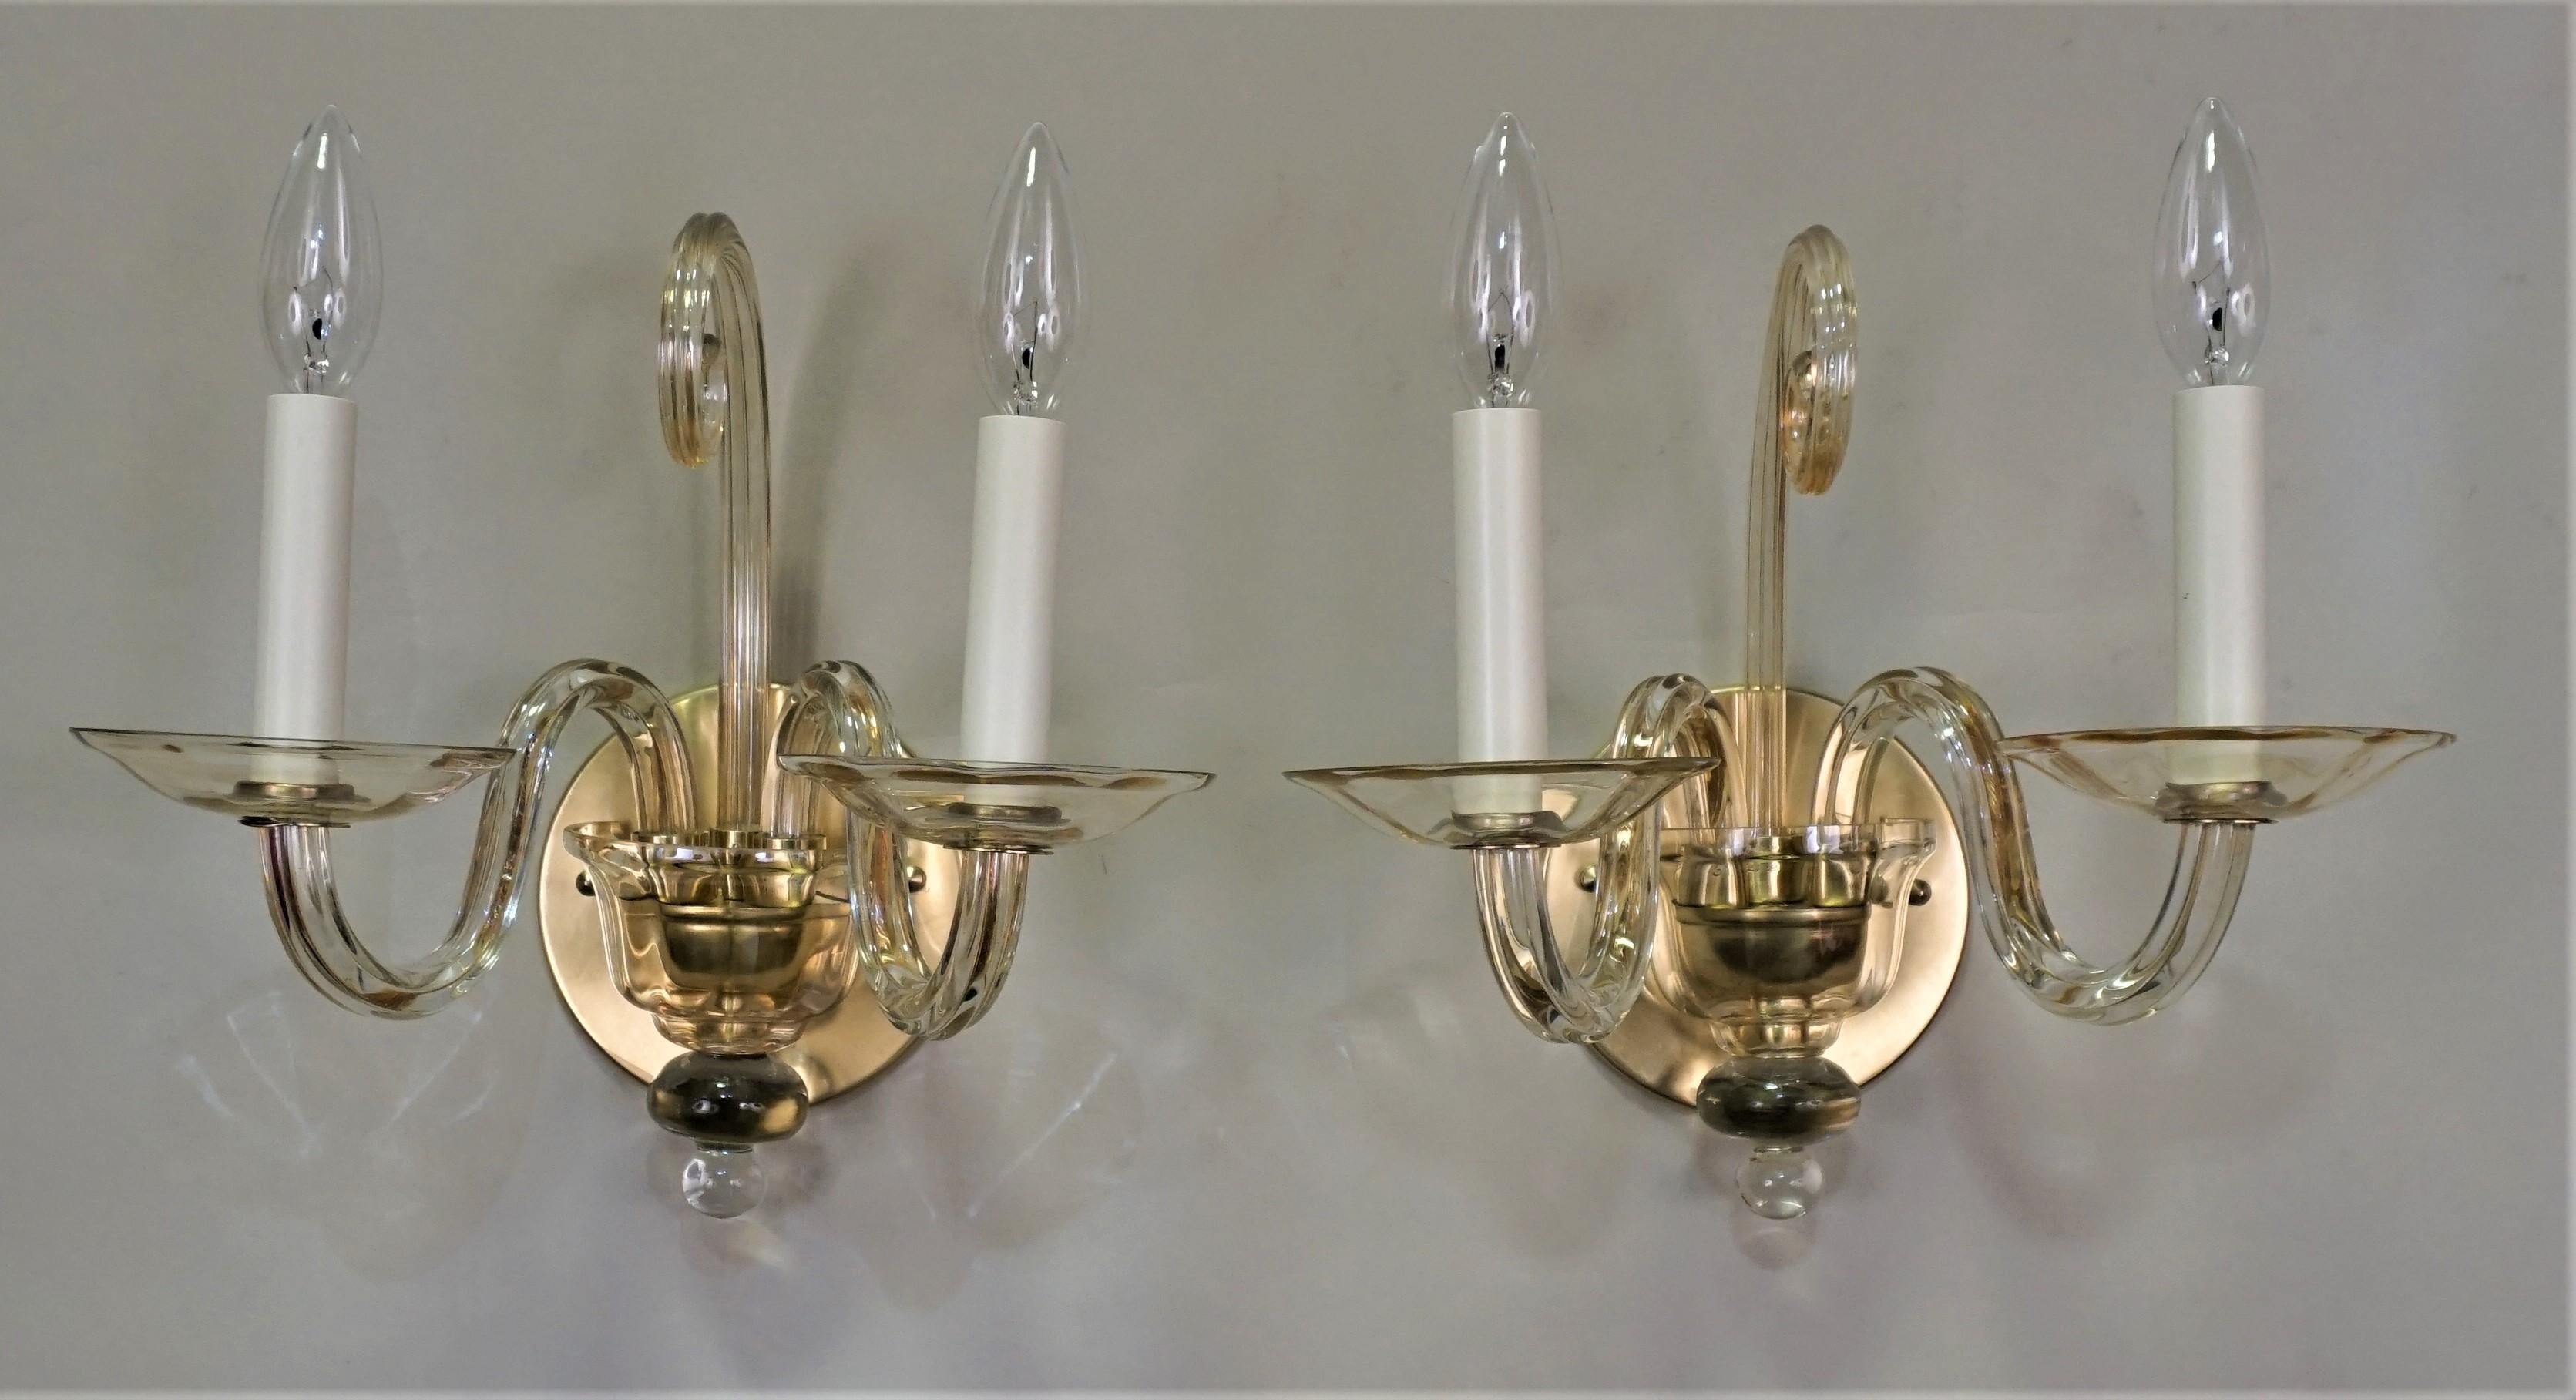 Pair of 1970s Blown Glass Wall Sconces In Good Condition For Sale In Fairfax, VA